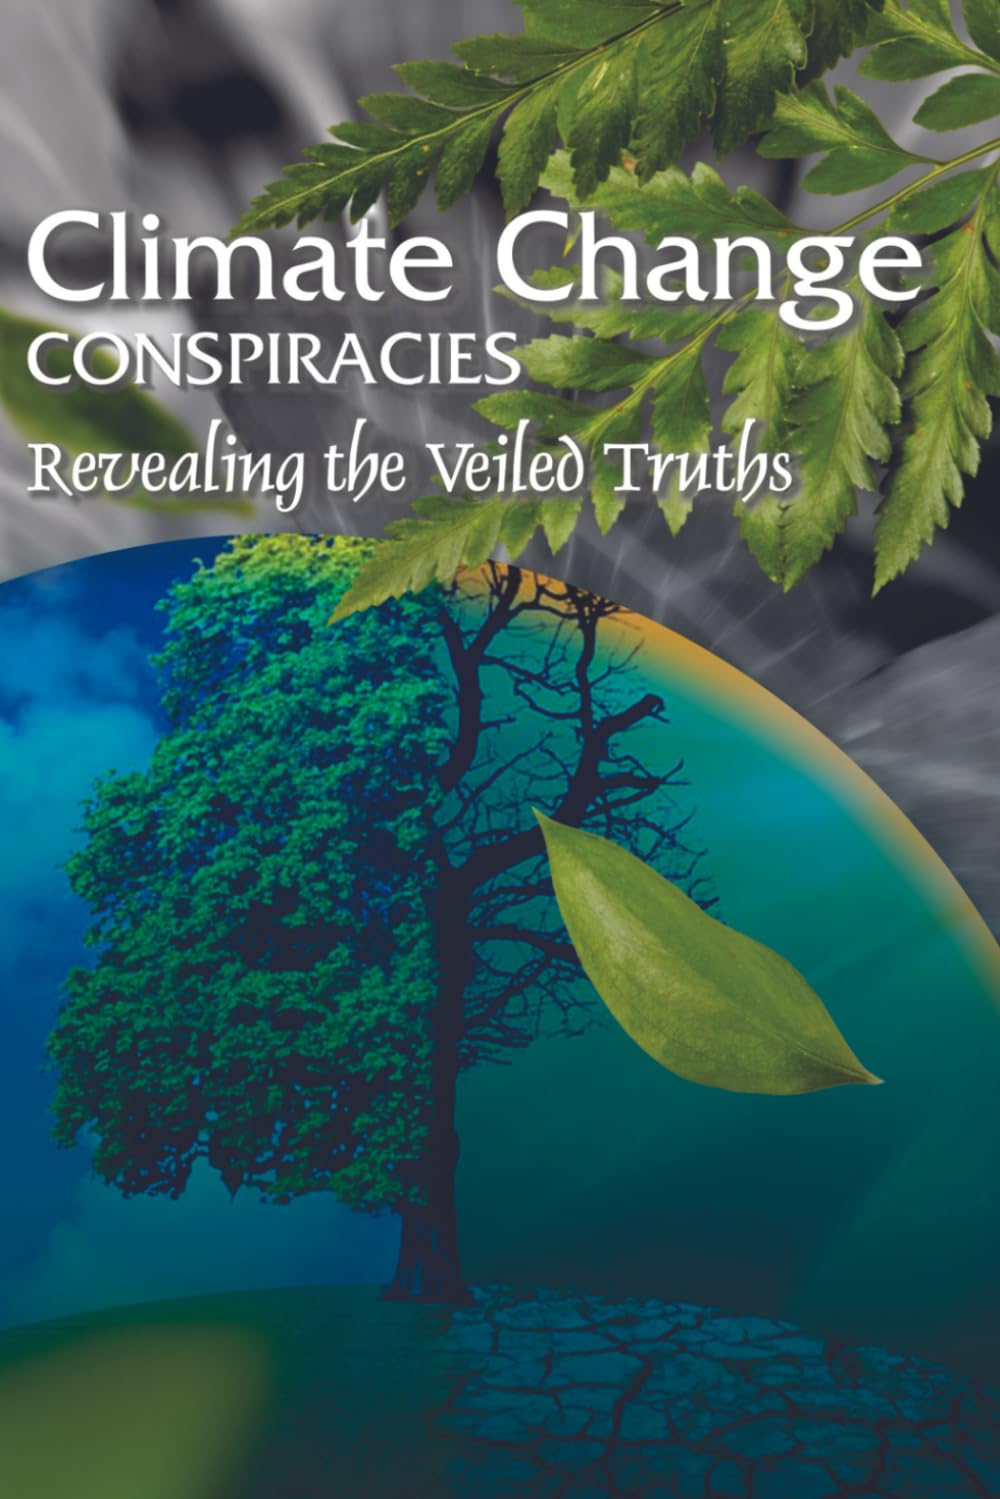 Climate Change Conspiracies: Revealing the Veiled Truths